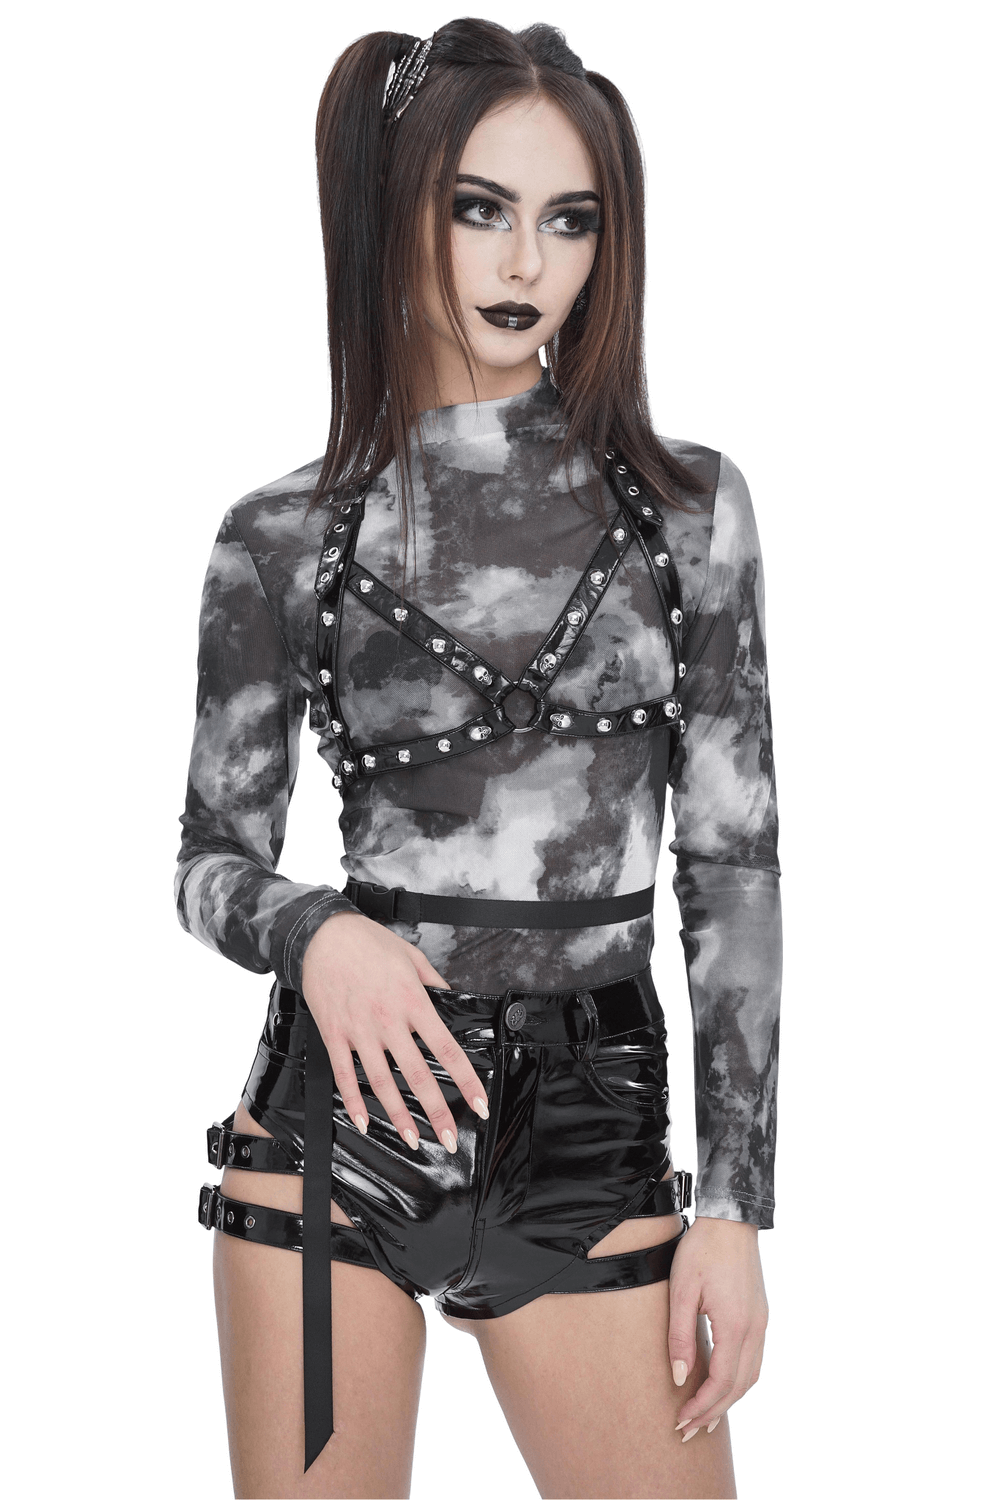 Edgy Female Tie-Dye Top with Riveted Harness Detail